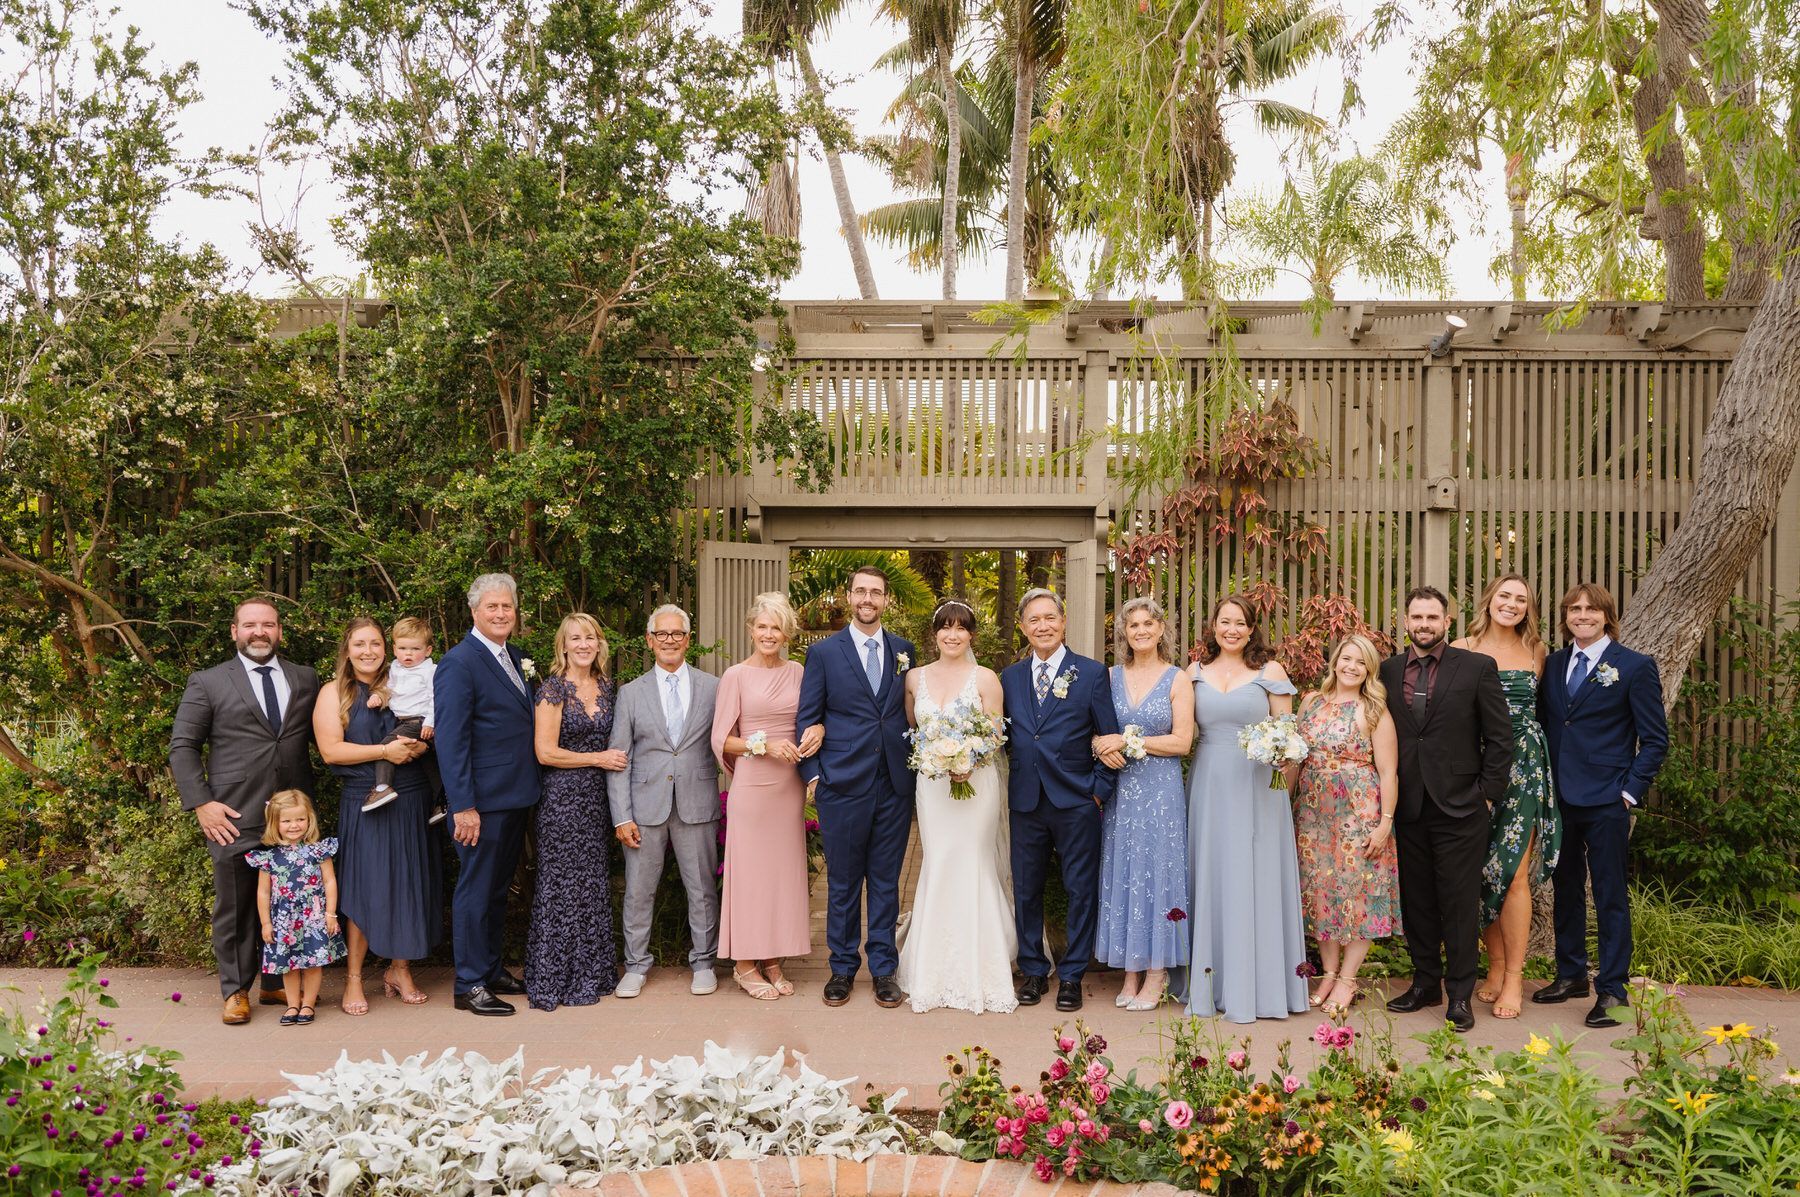 A large group of family members are posing for a picture at a wedding.